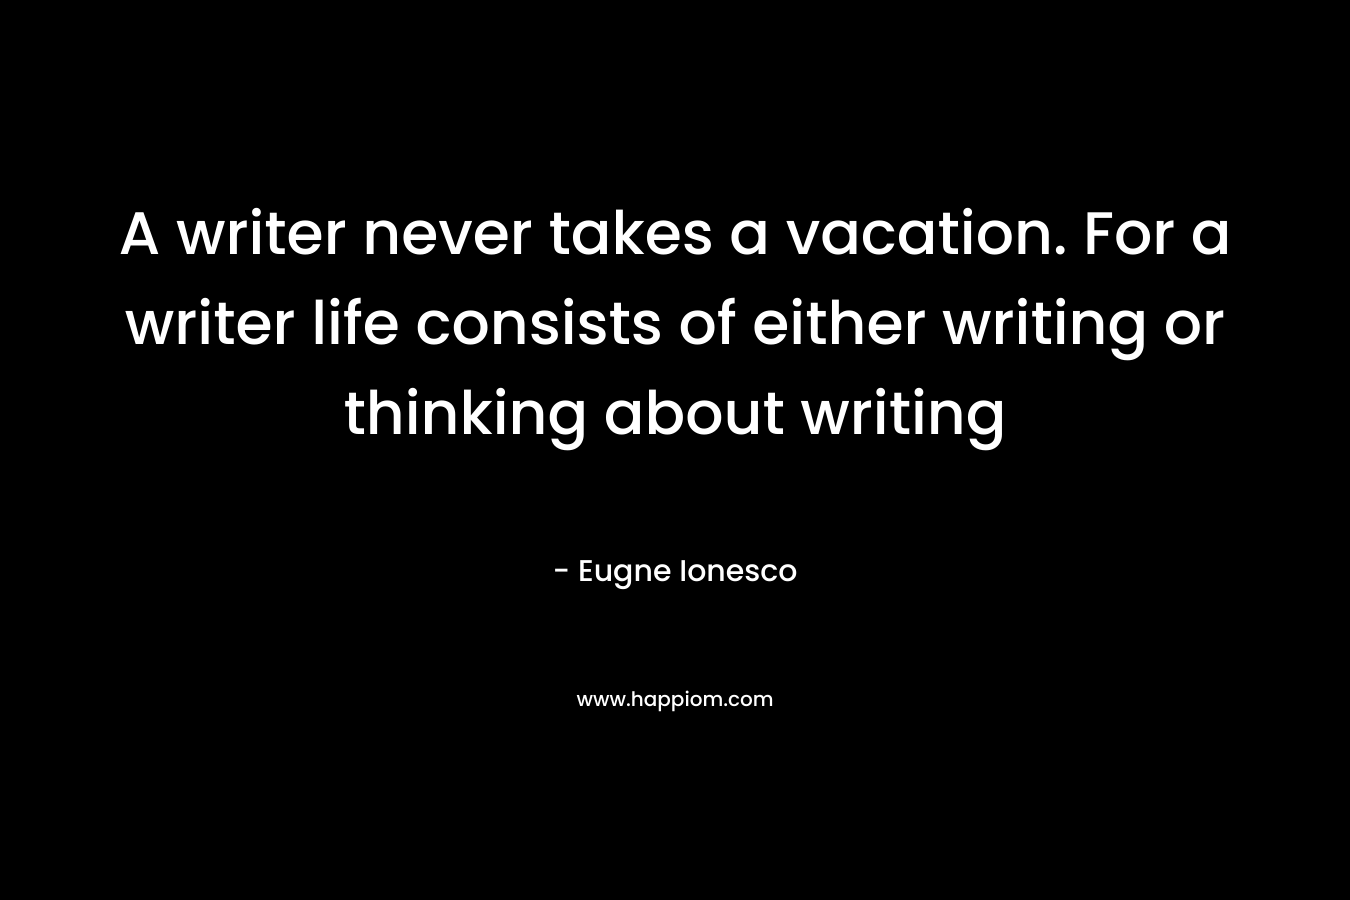 A writer never takes a vacation. For a writer life consists of either writing or thinking about writing